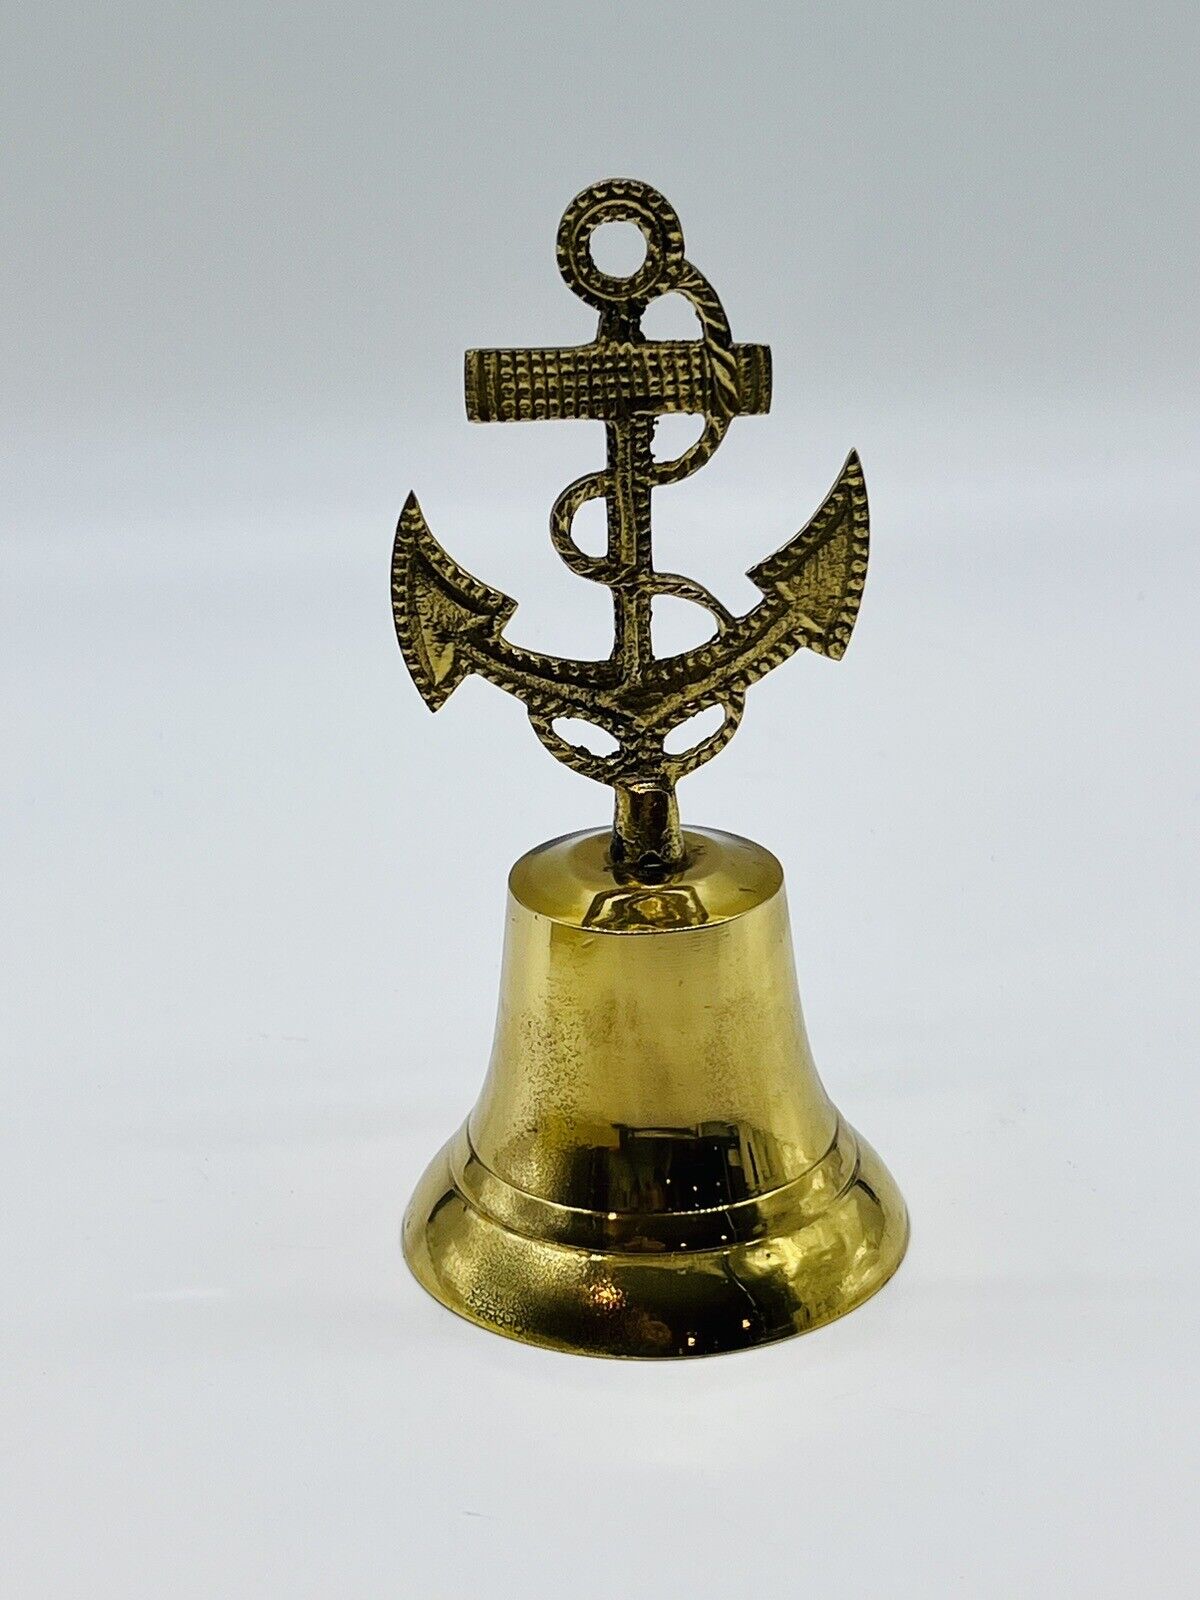 VINTAGE NAUTICAL METAL BELL WITH ANCHOR AND ROPE 7 INCHES TALL NAVY 